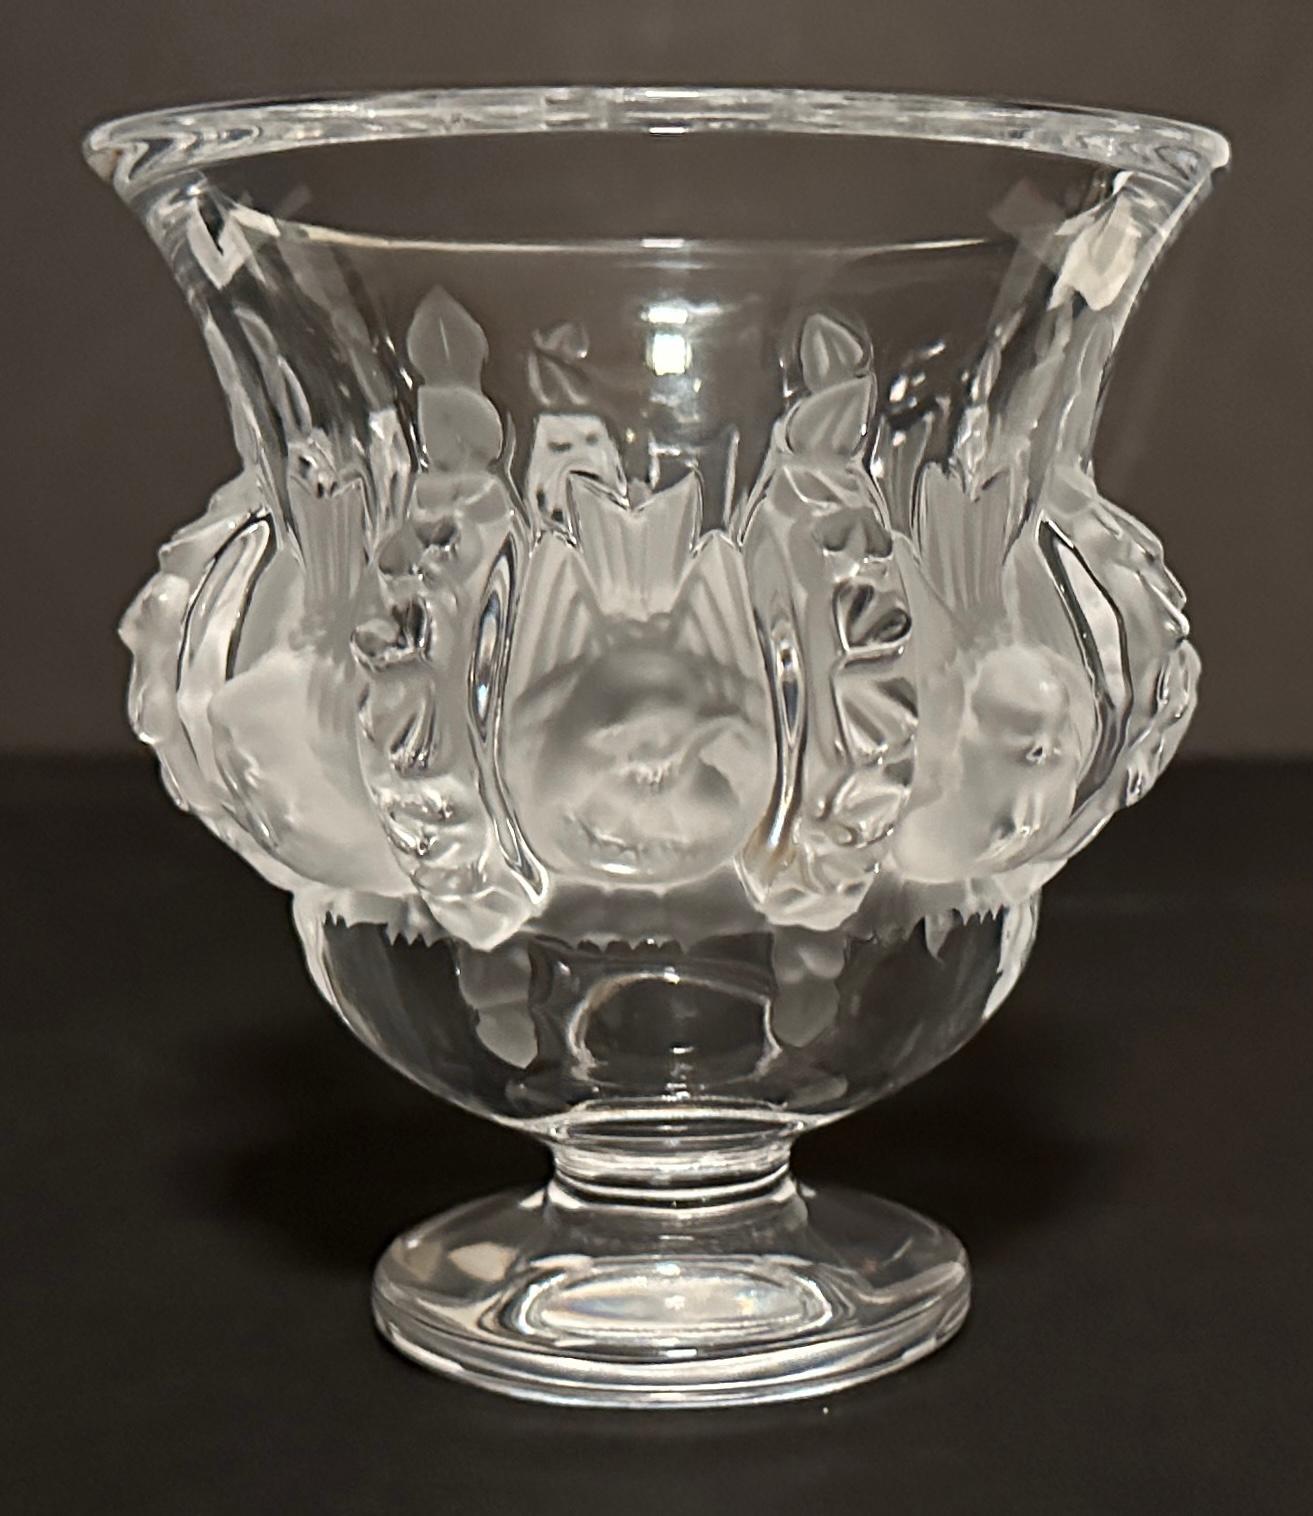 Lalique Dampierre crystal vase, signed on bottom.
Designed in 1948 by Marc Lalique, this vase is decorated with carved birds in satin crystal. Through this vase, Lalique pays tribute to two themes dear to René Lalique, the Fauna and Flora . This